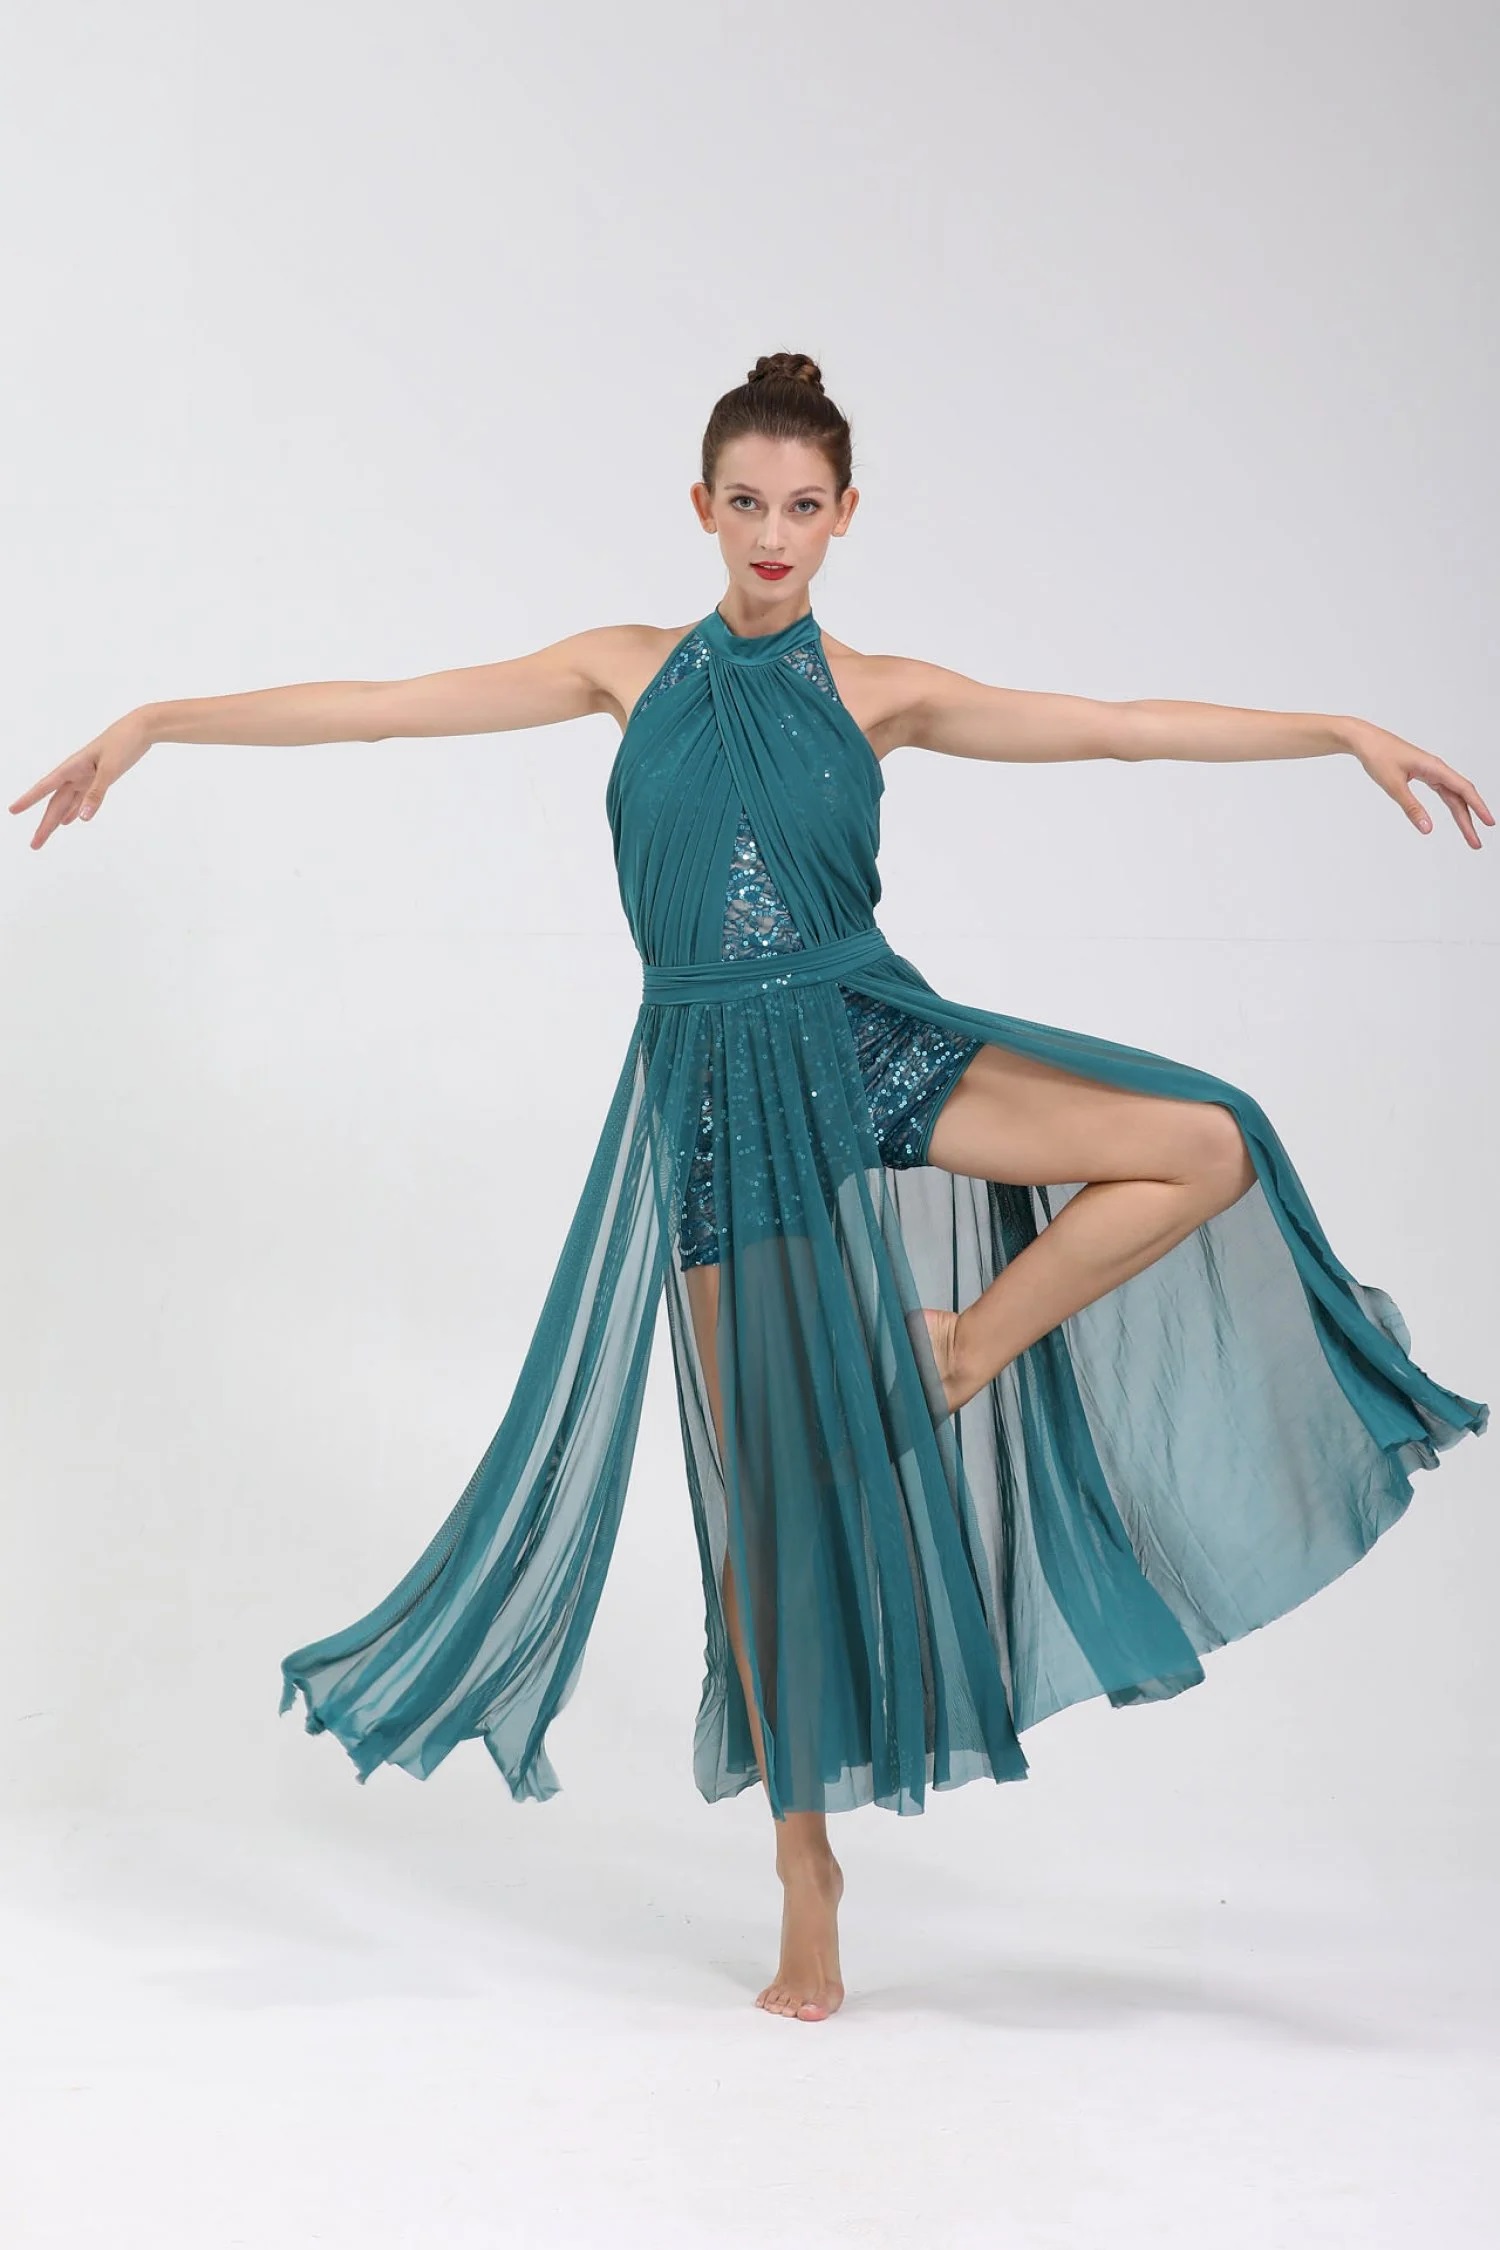 Diva Costumes Ltd on X: Are you looking for the lyrical costume